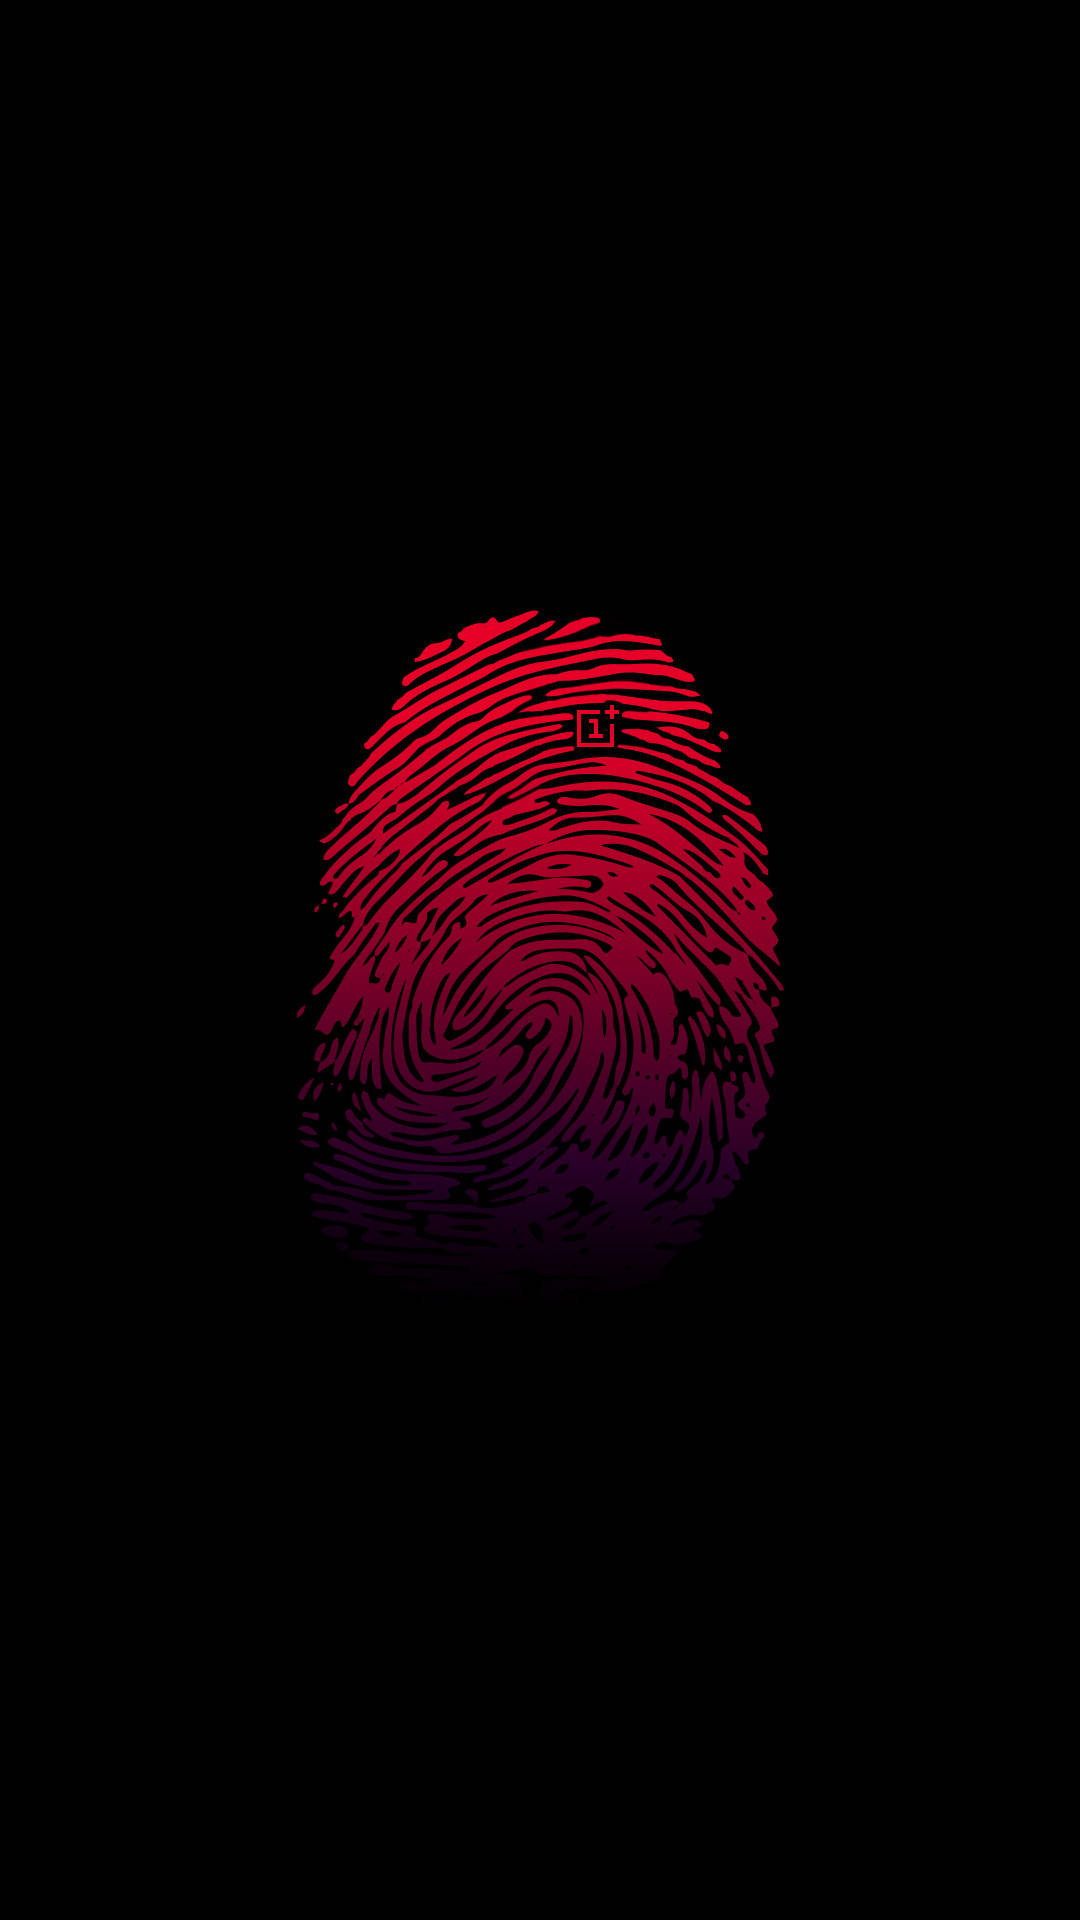 Vibrant Oneplus Red Thumbprint Image Background